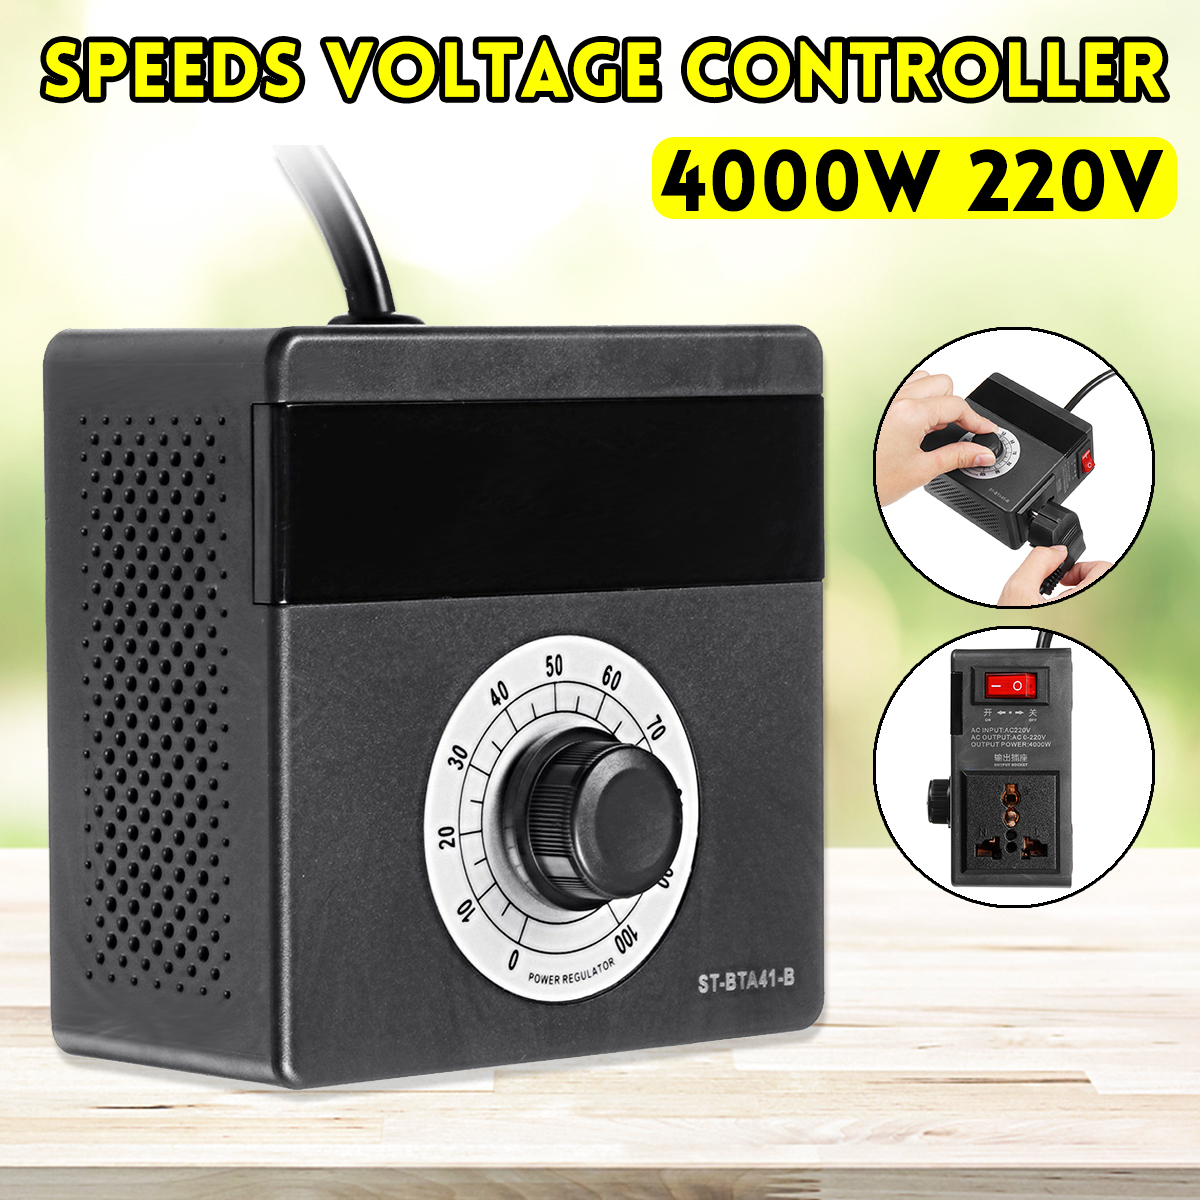 AC-220V-4000W-Variable-Electronic-Speeds-Voltage-Temperature-Controller-For-Fan-Motor-1468761-1